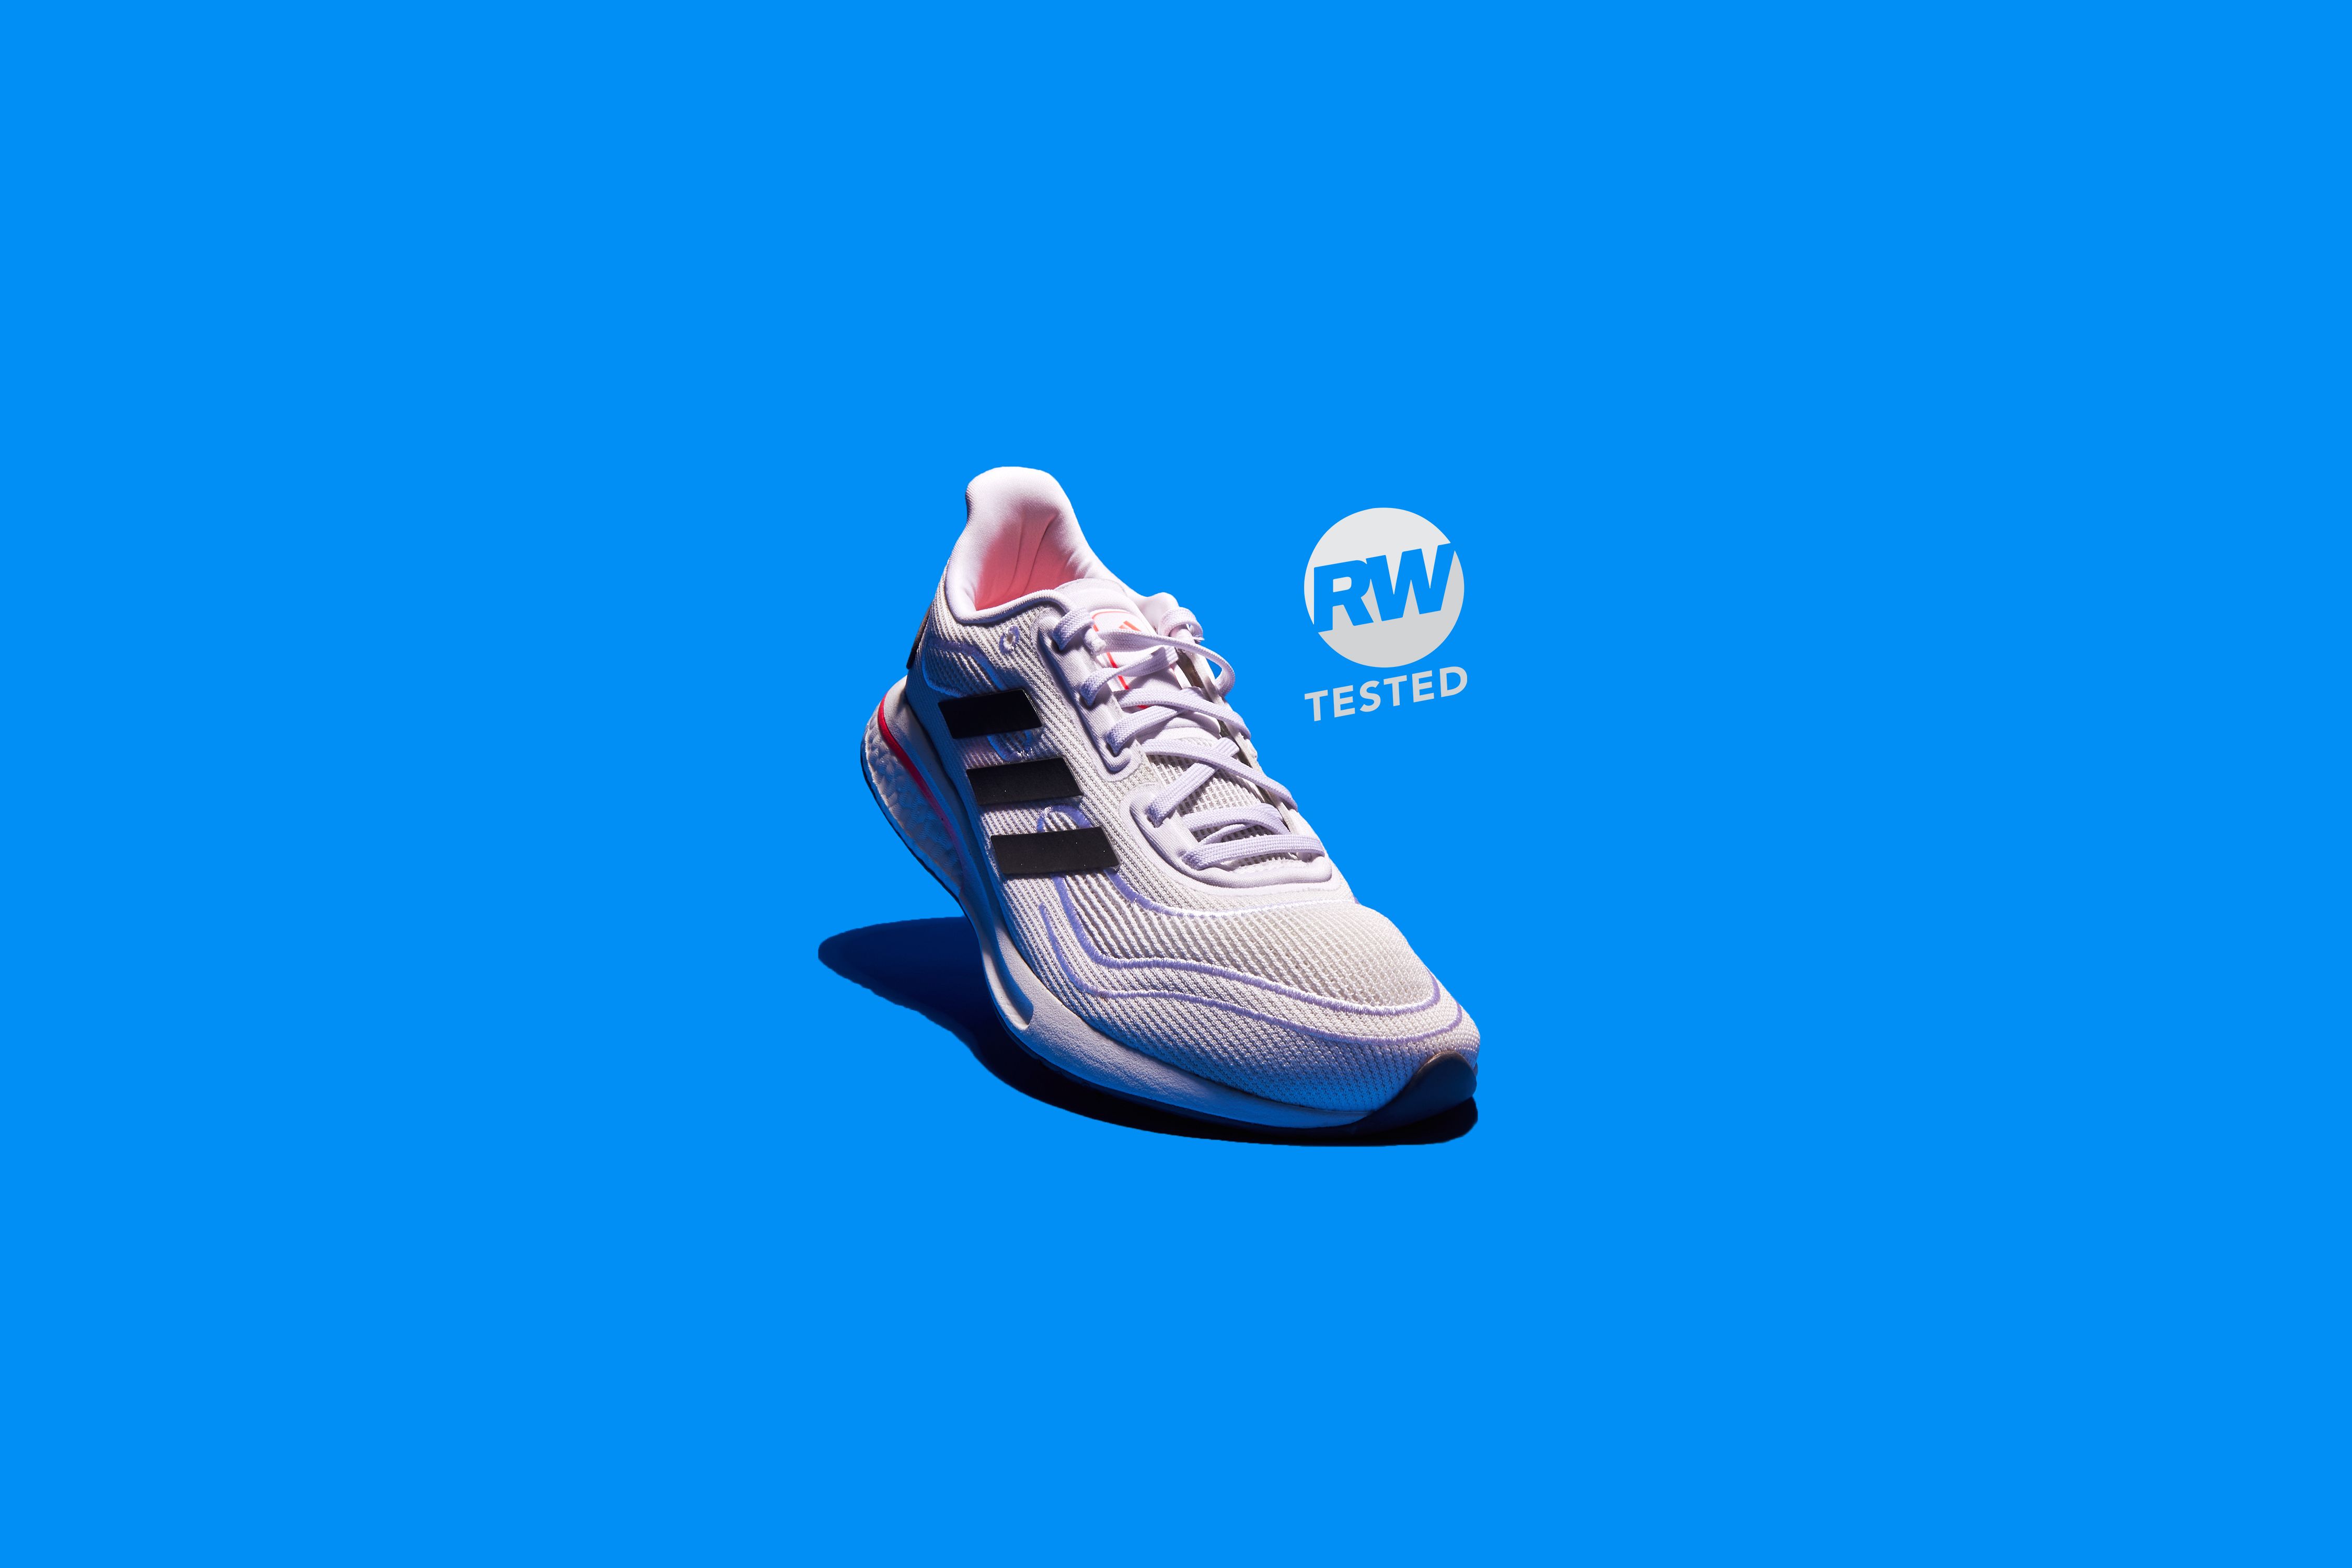 Clam satisfaction scientist Adidas Supernova Review | Running Shoe Reviews 2021